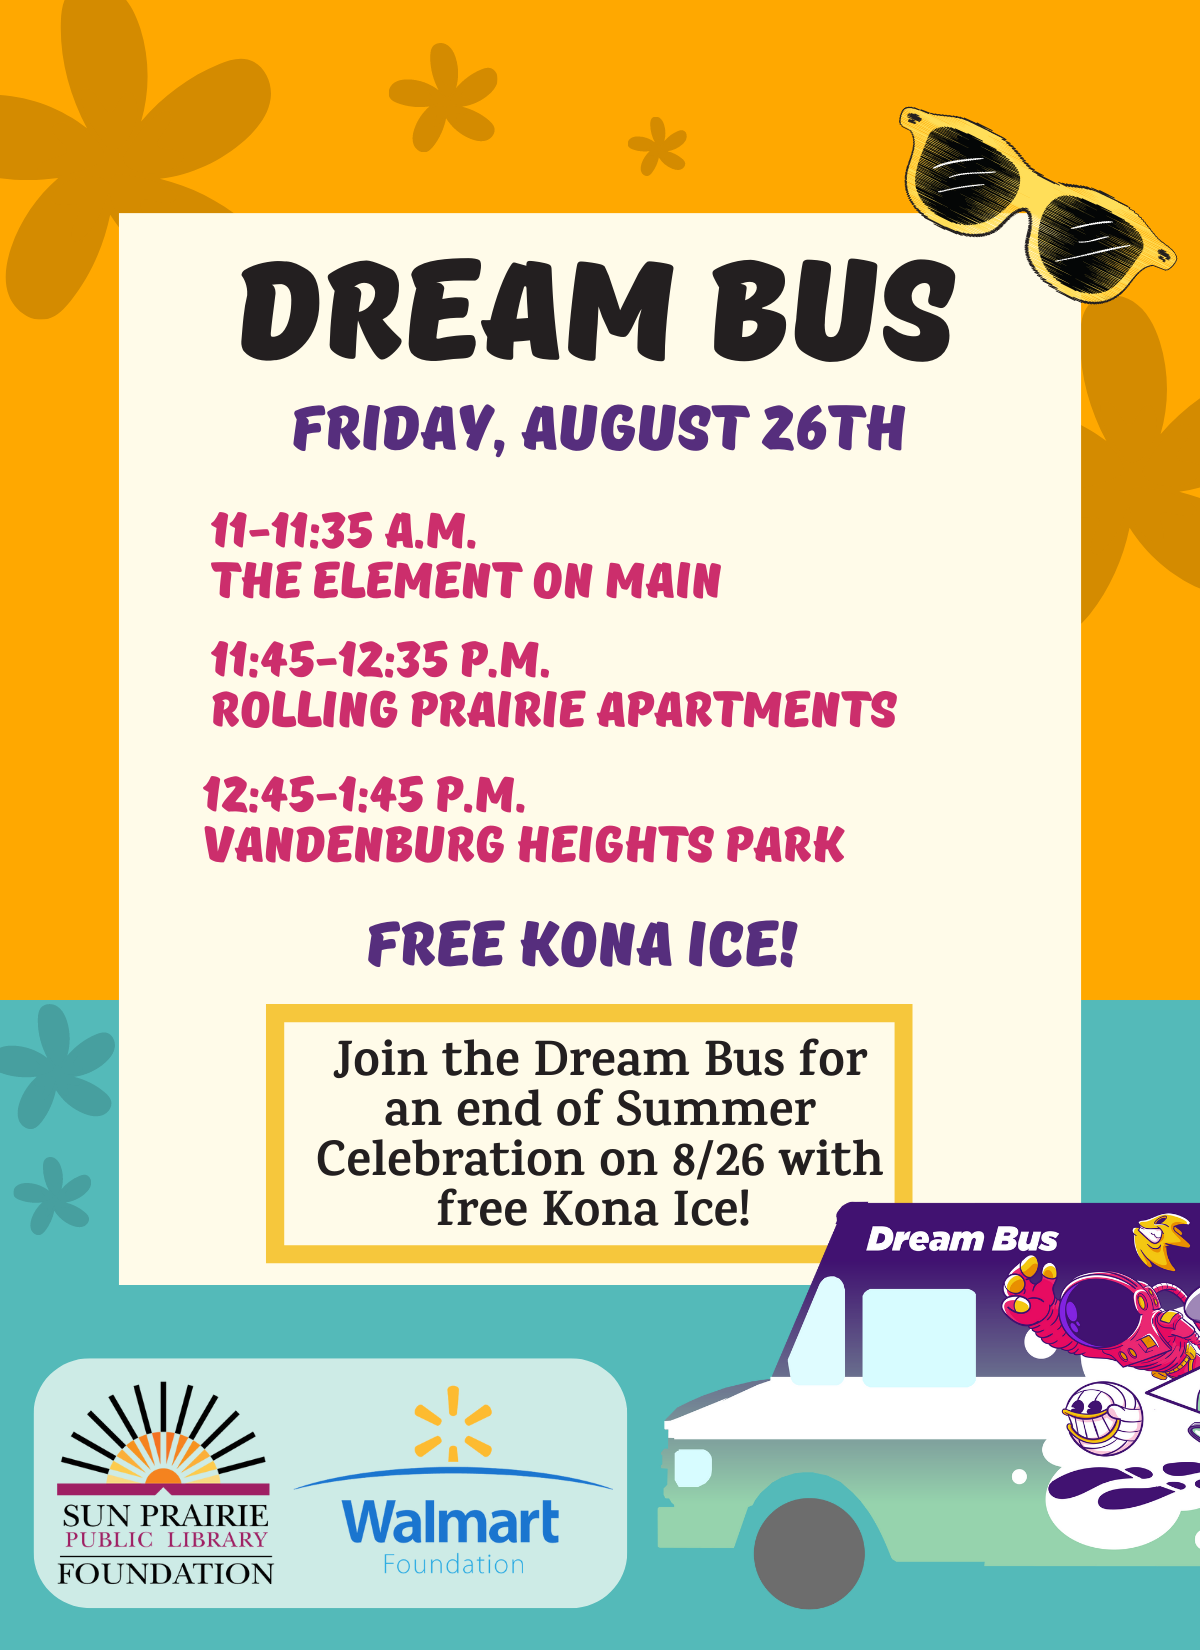 A flyer advertising the Dream Bus End of Summer Celebration